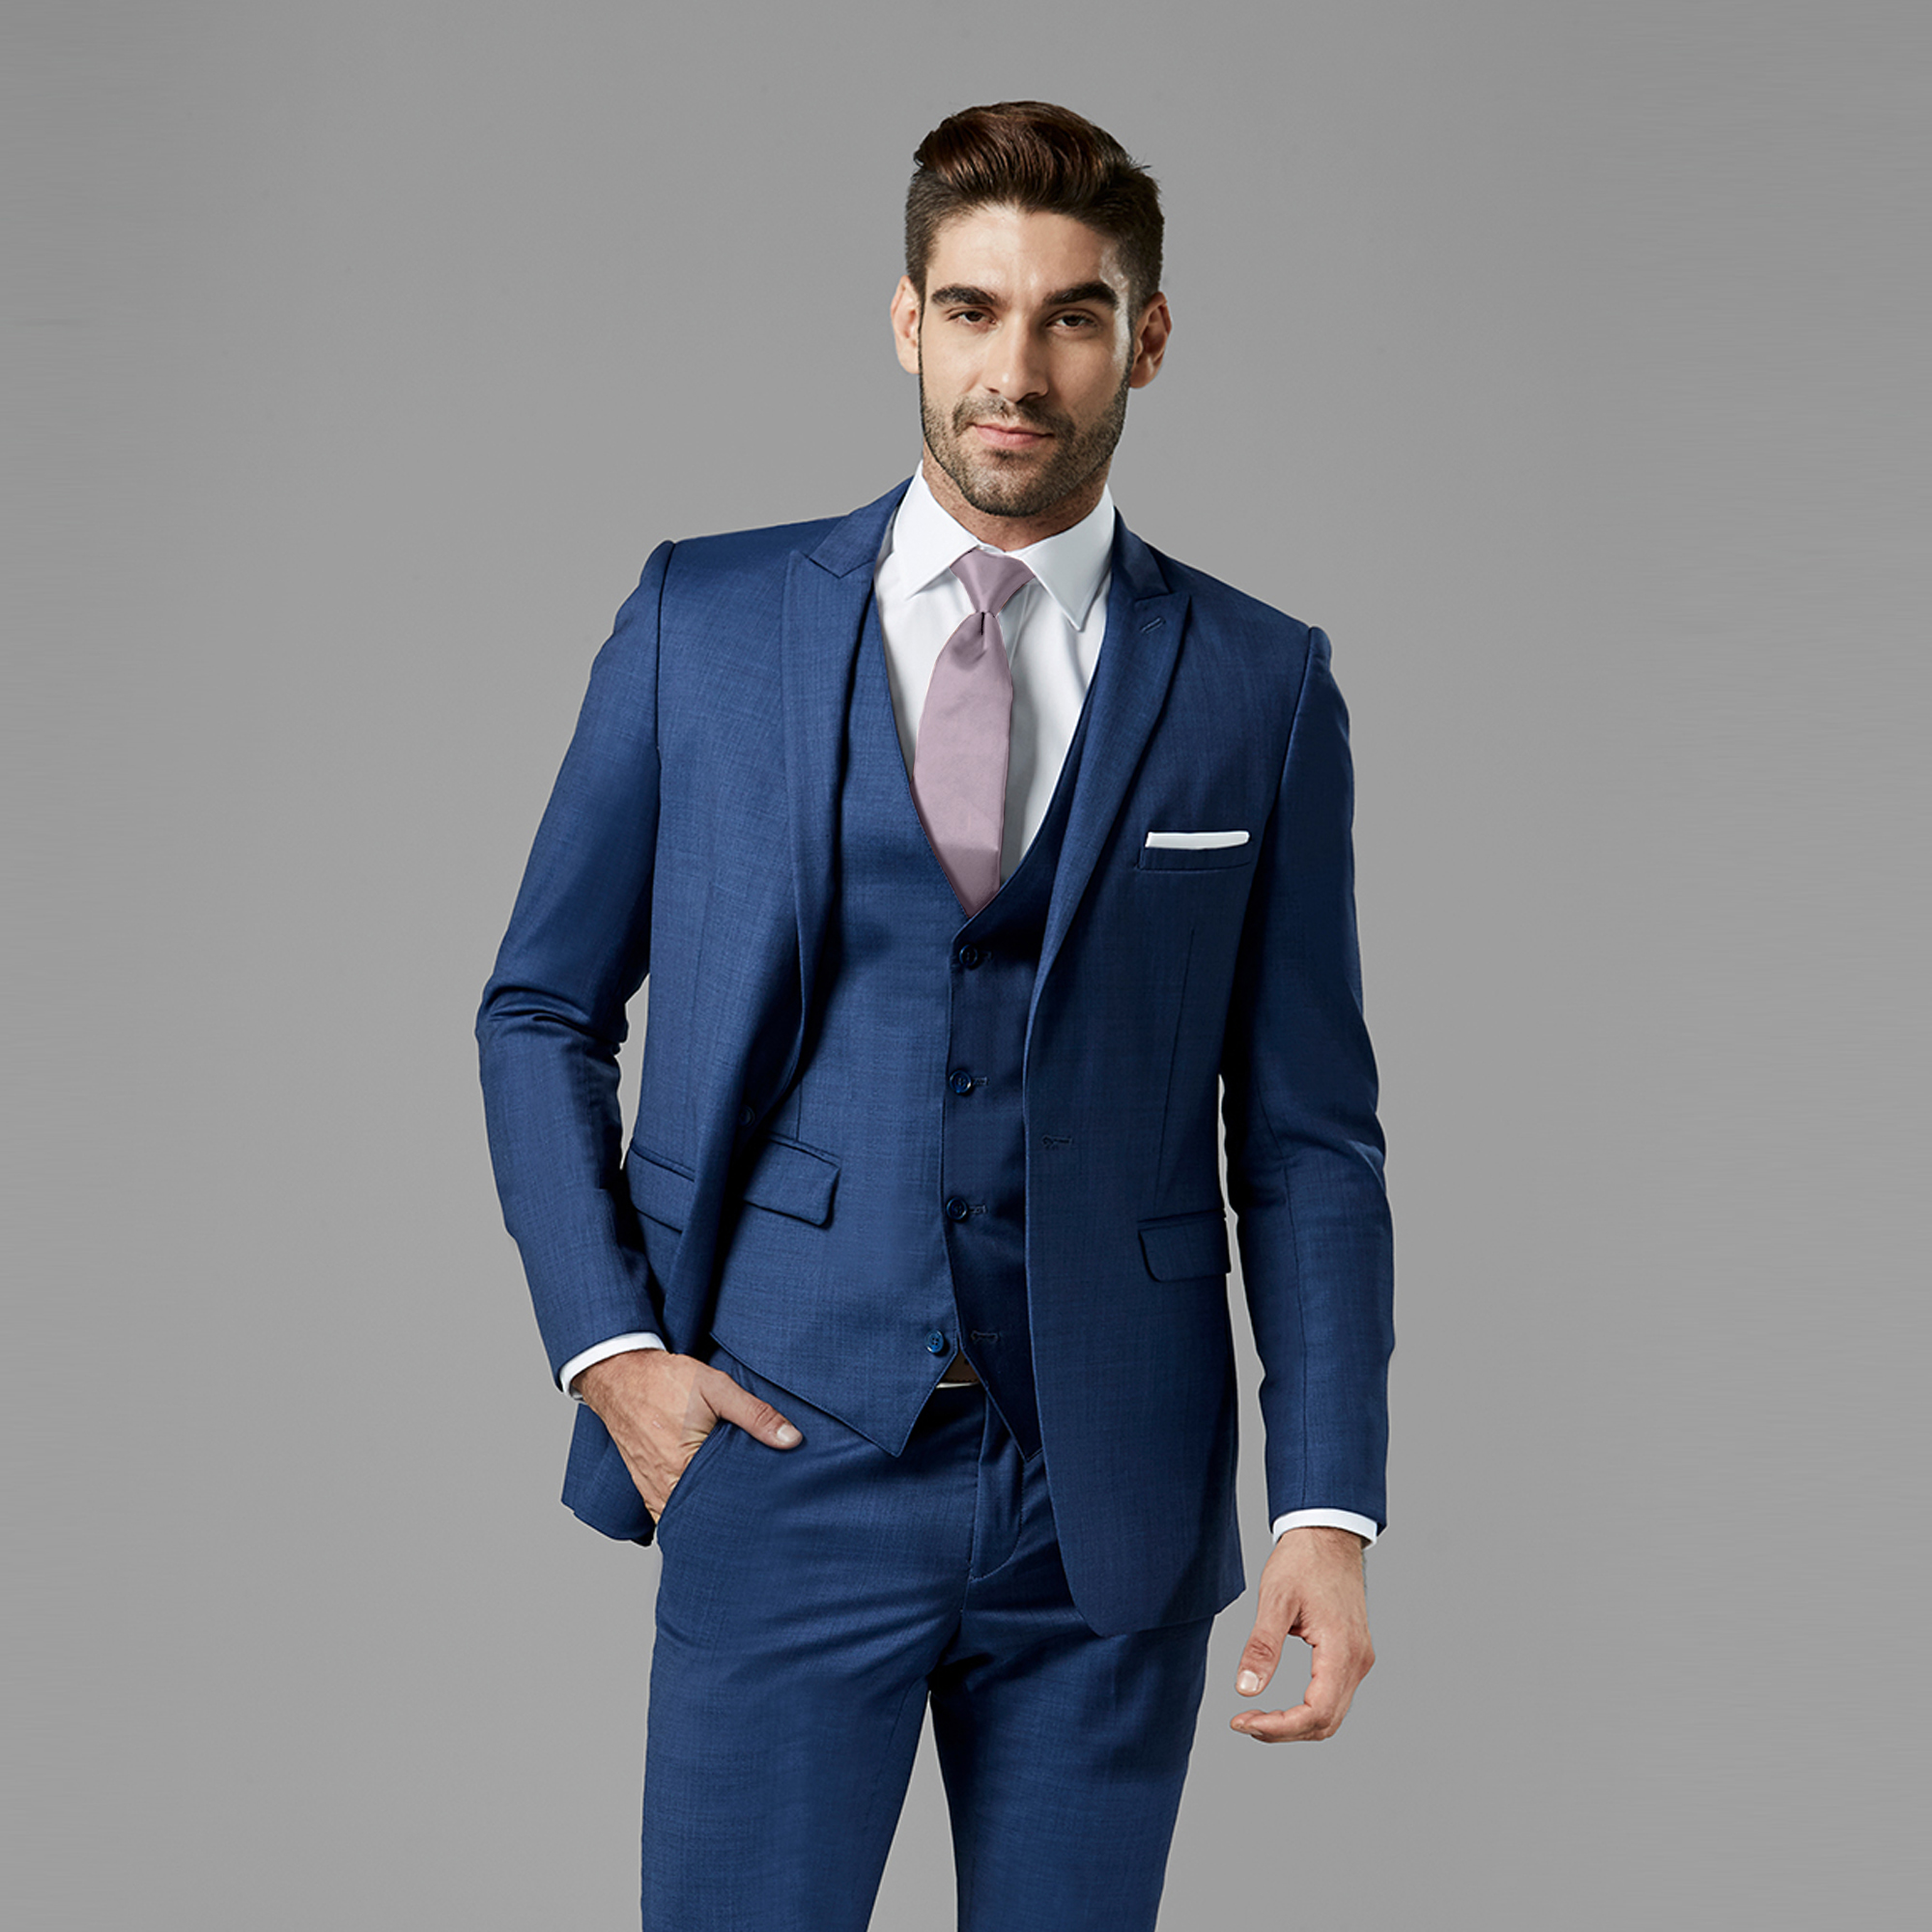 Groomsmen Attire: Find the Right Fit for Your Crew